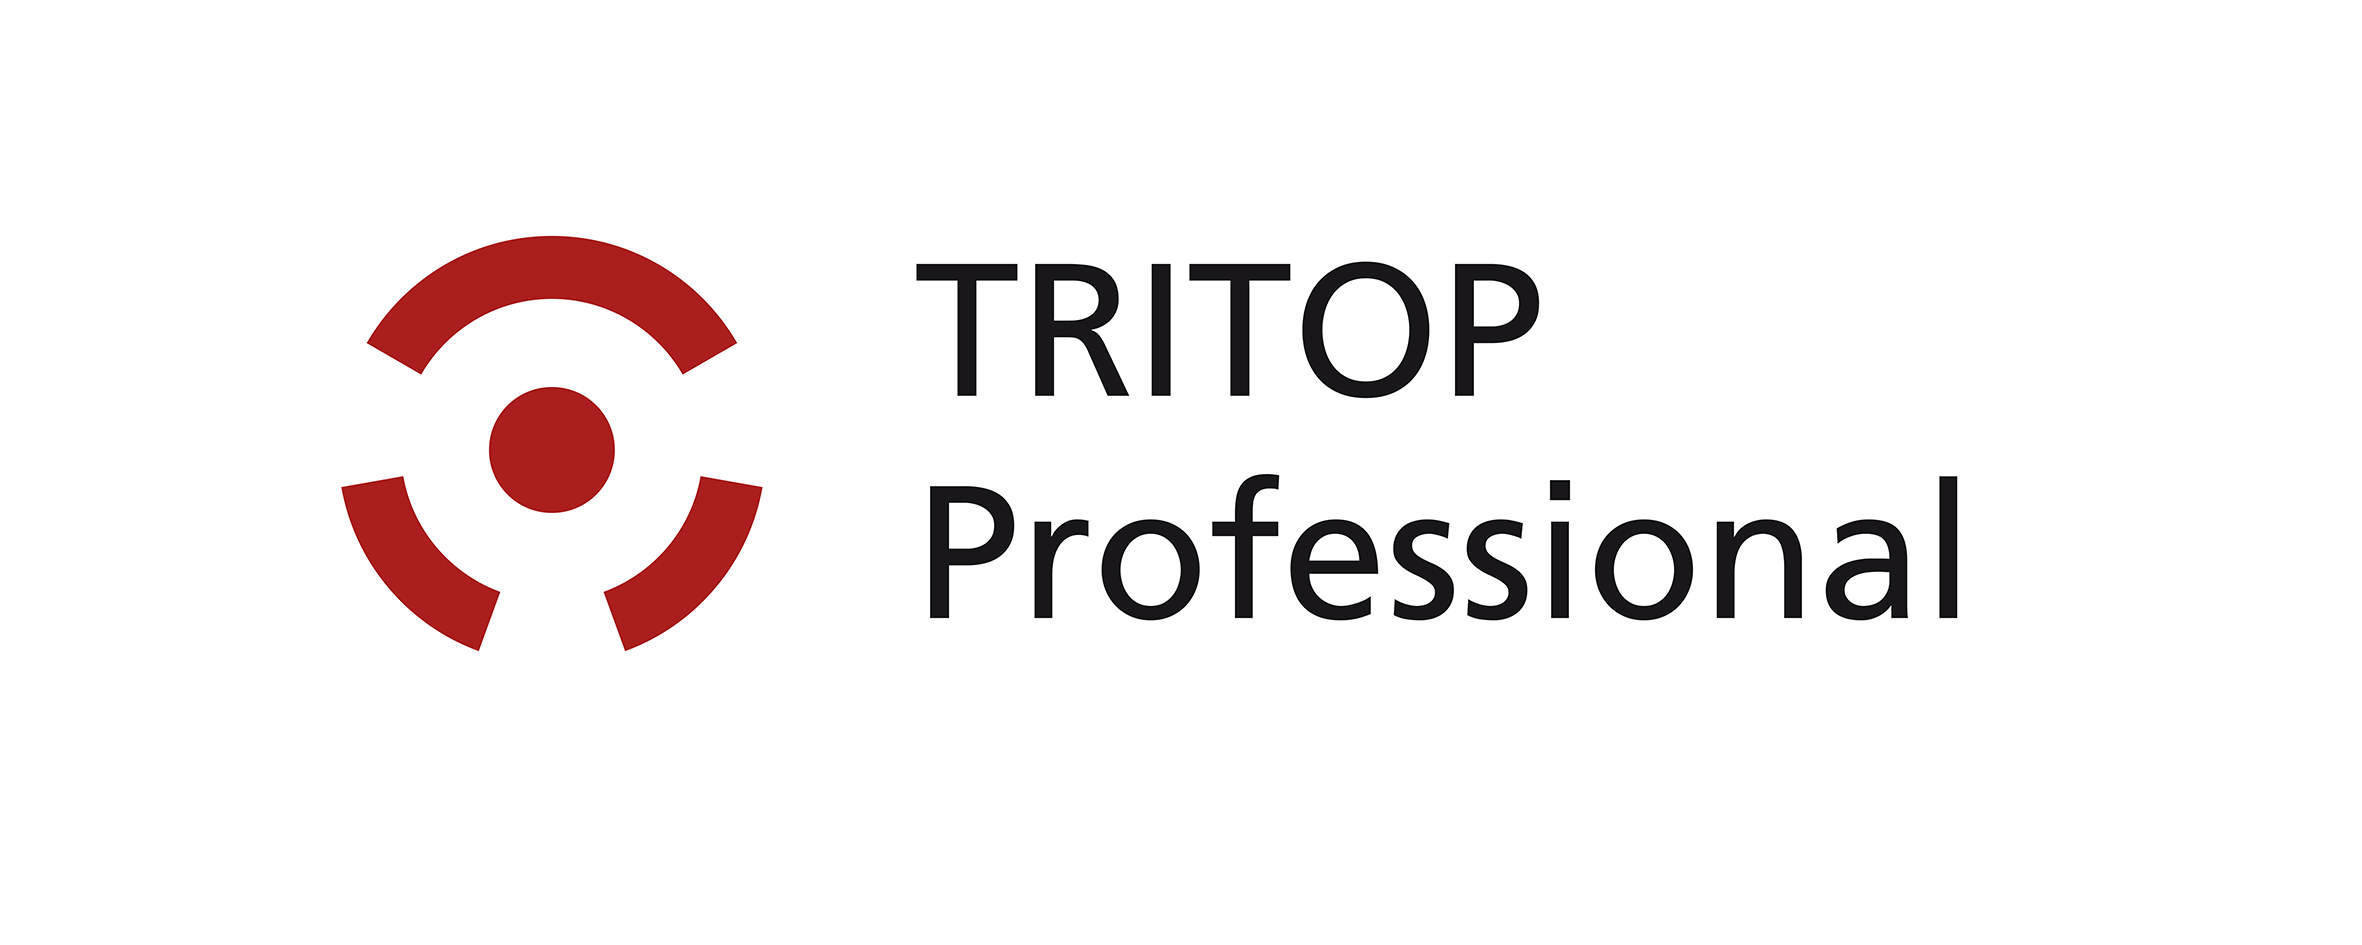 TRITOP Professional - Photogrammetry software for inspection and deformation analysis